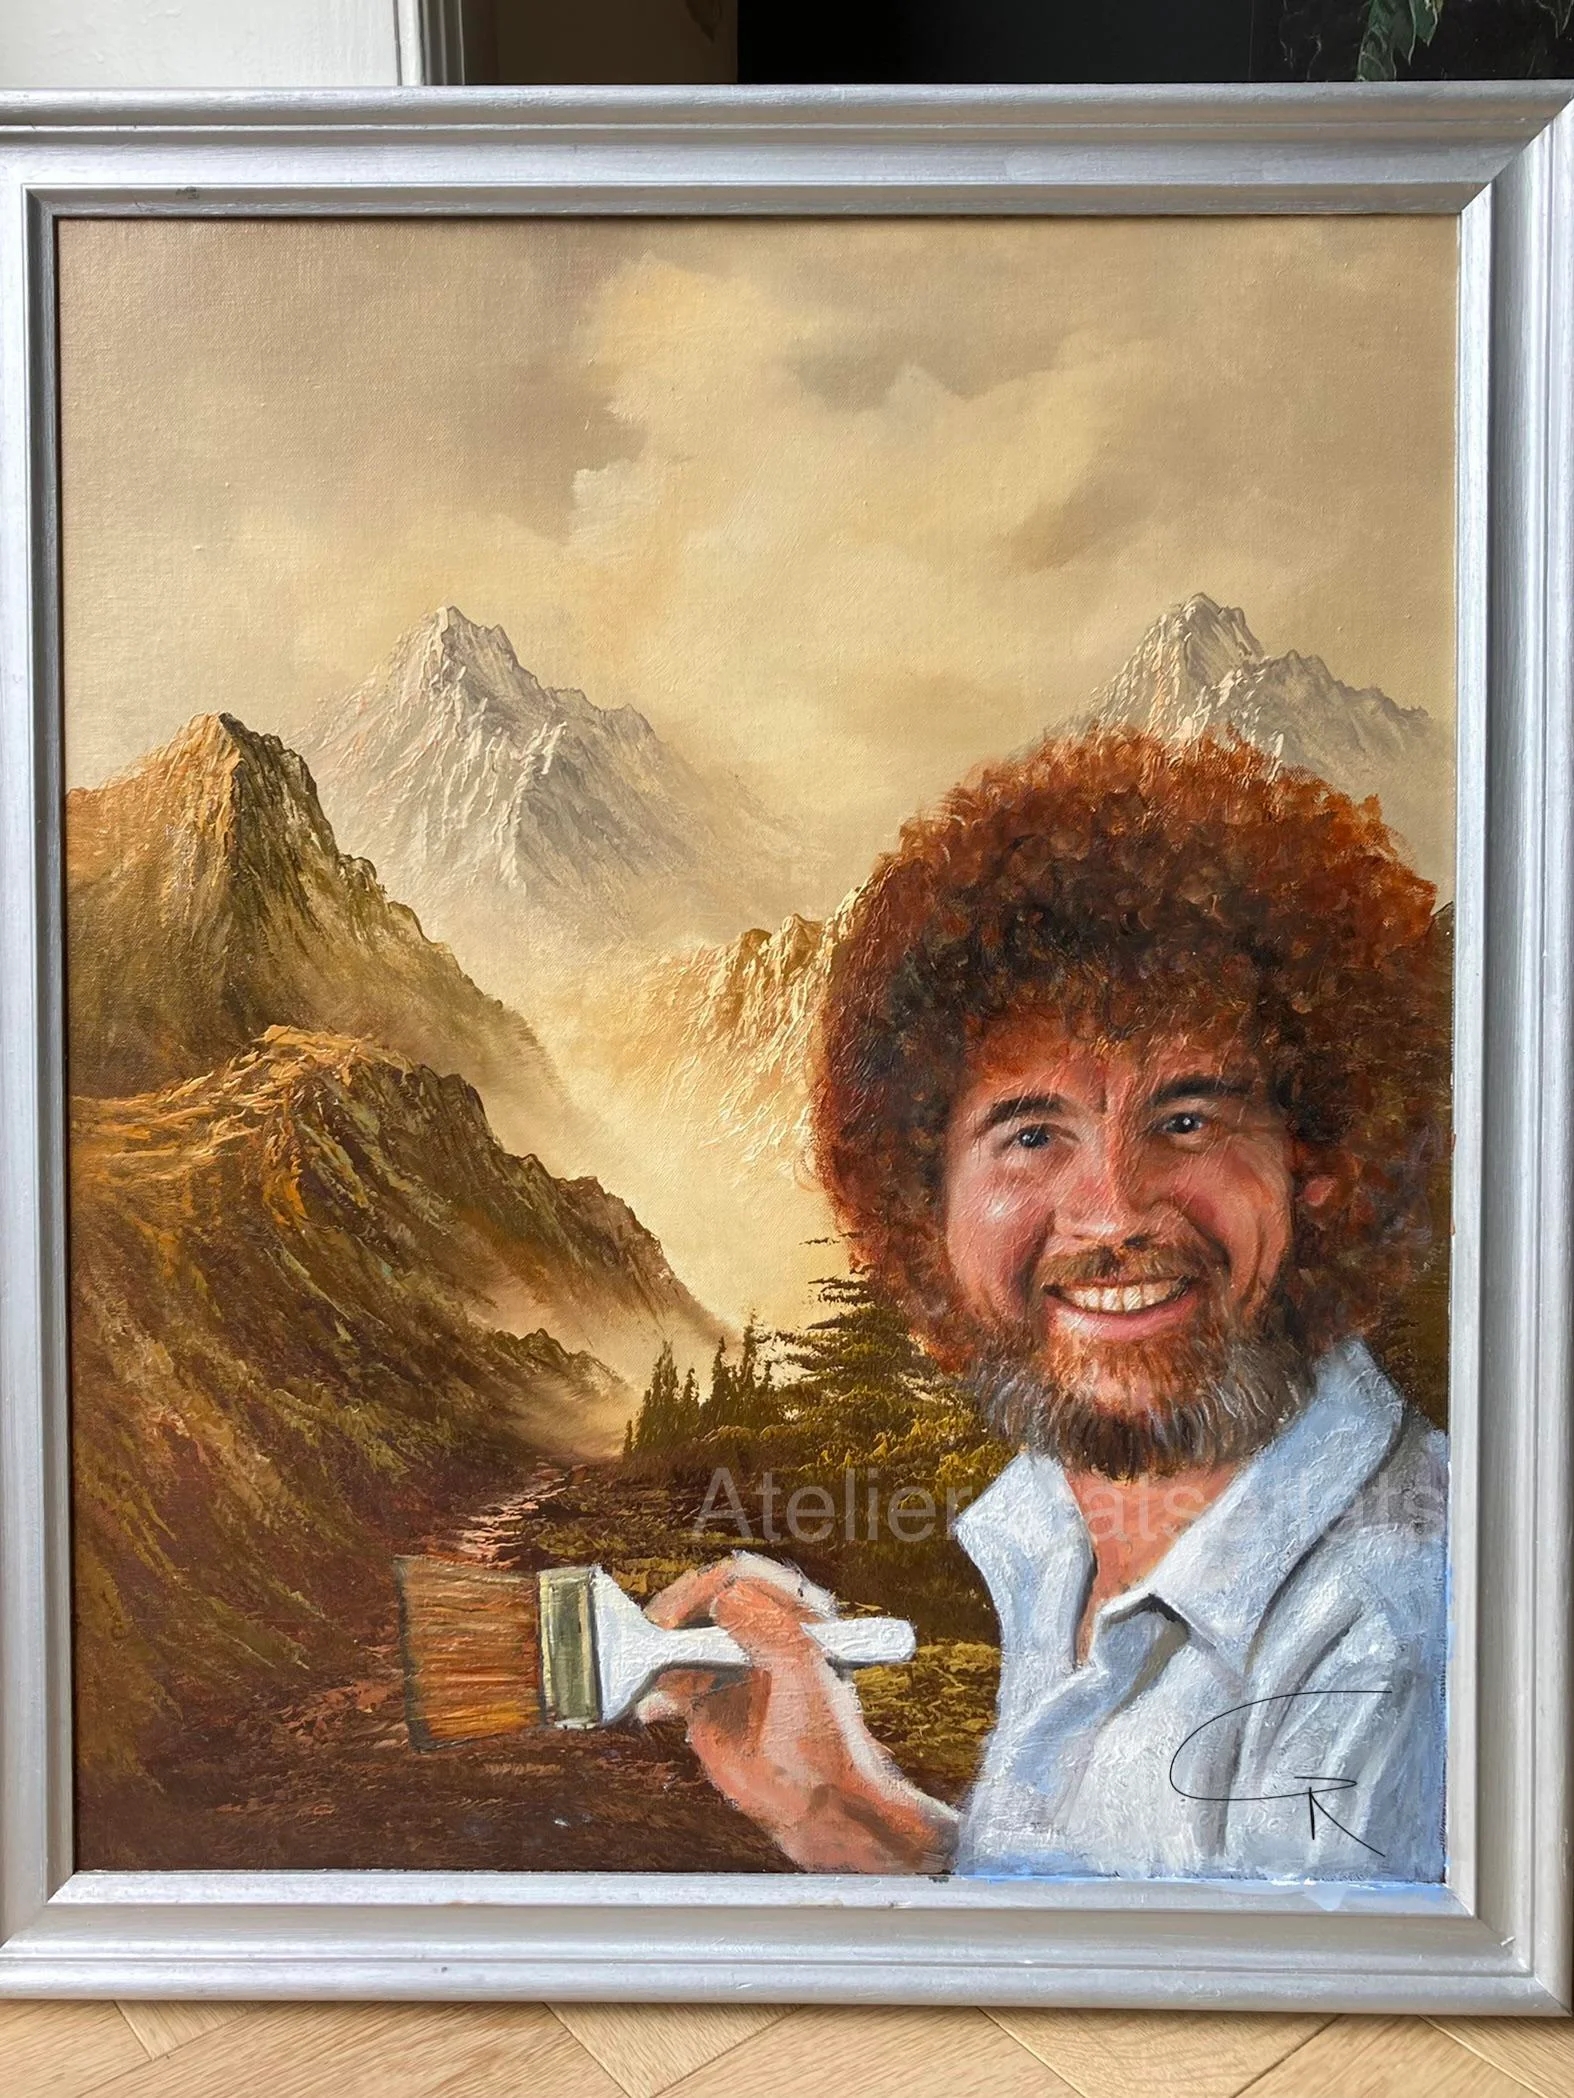 painting of mountains with fog toward the top and a path leading their. bob ross has been added and he's holding a brush, making it look like he's painting the painting he's in.